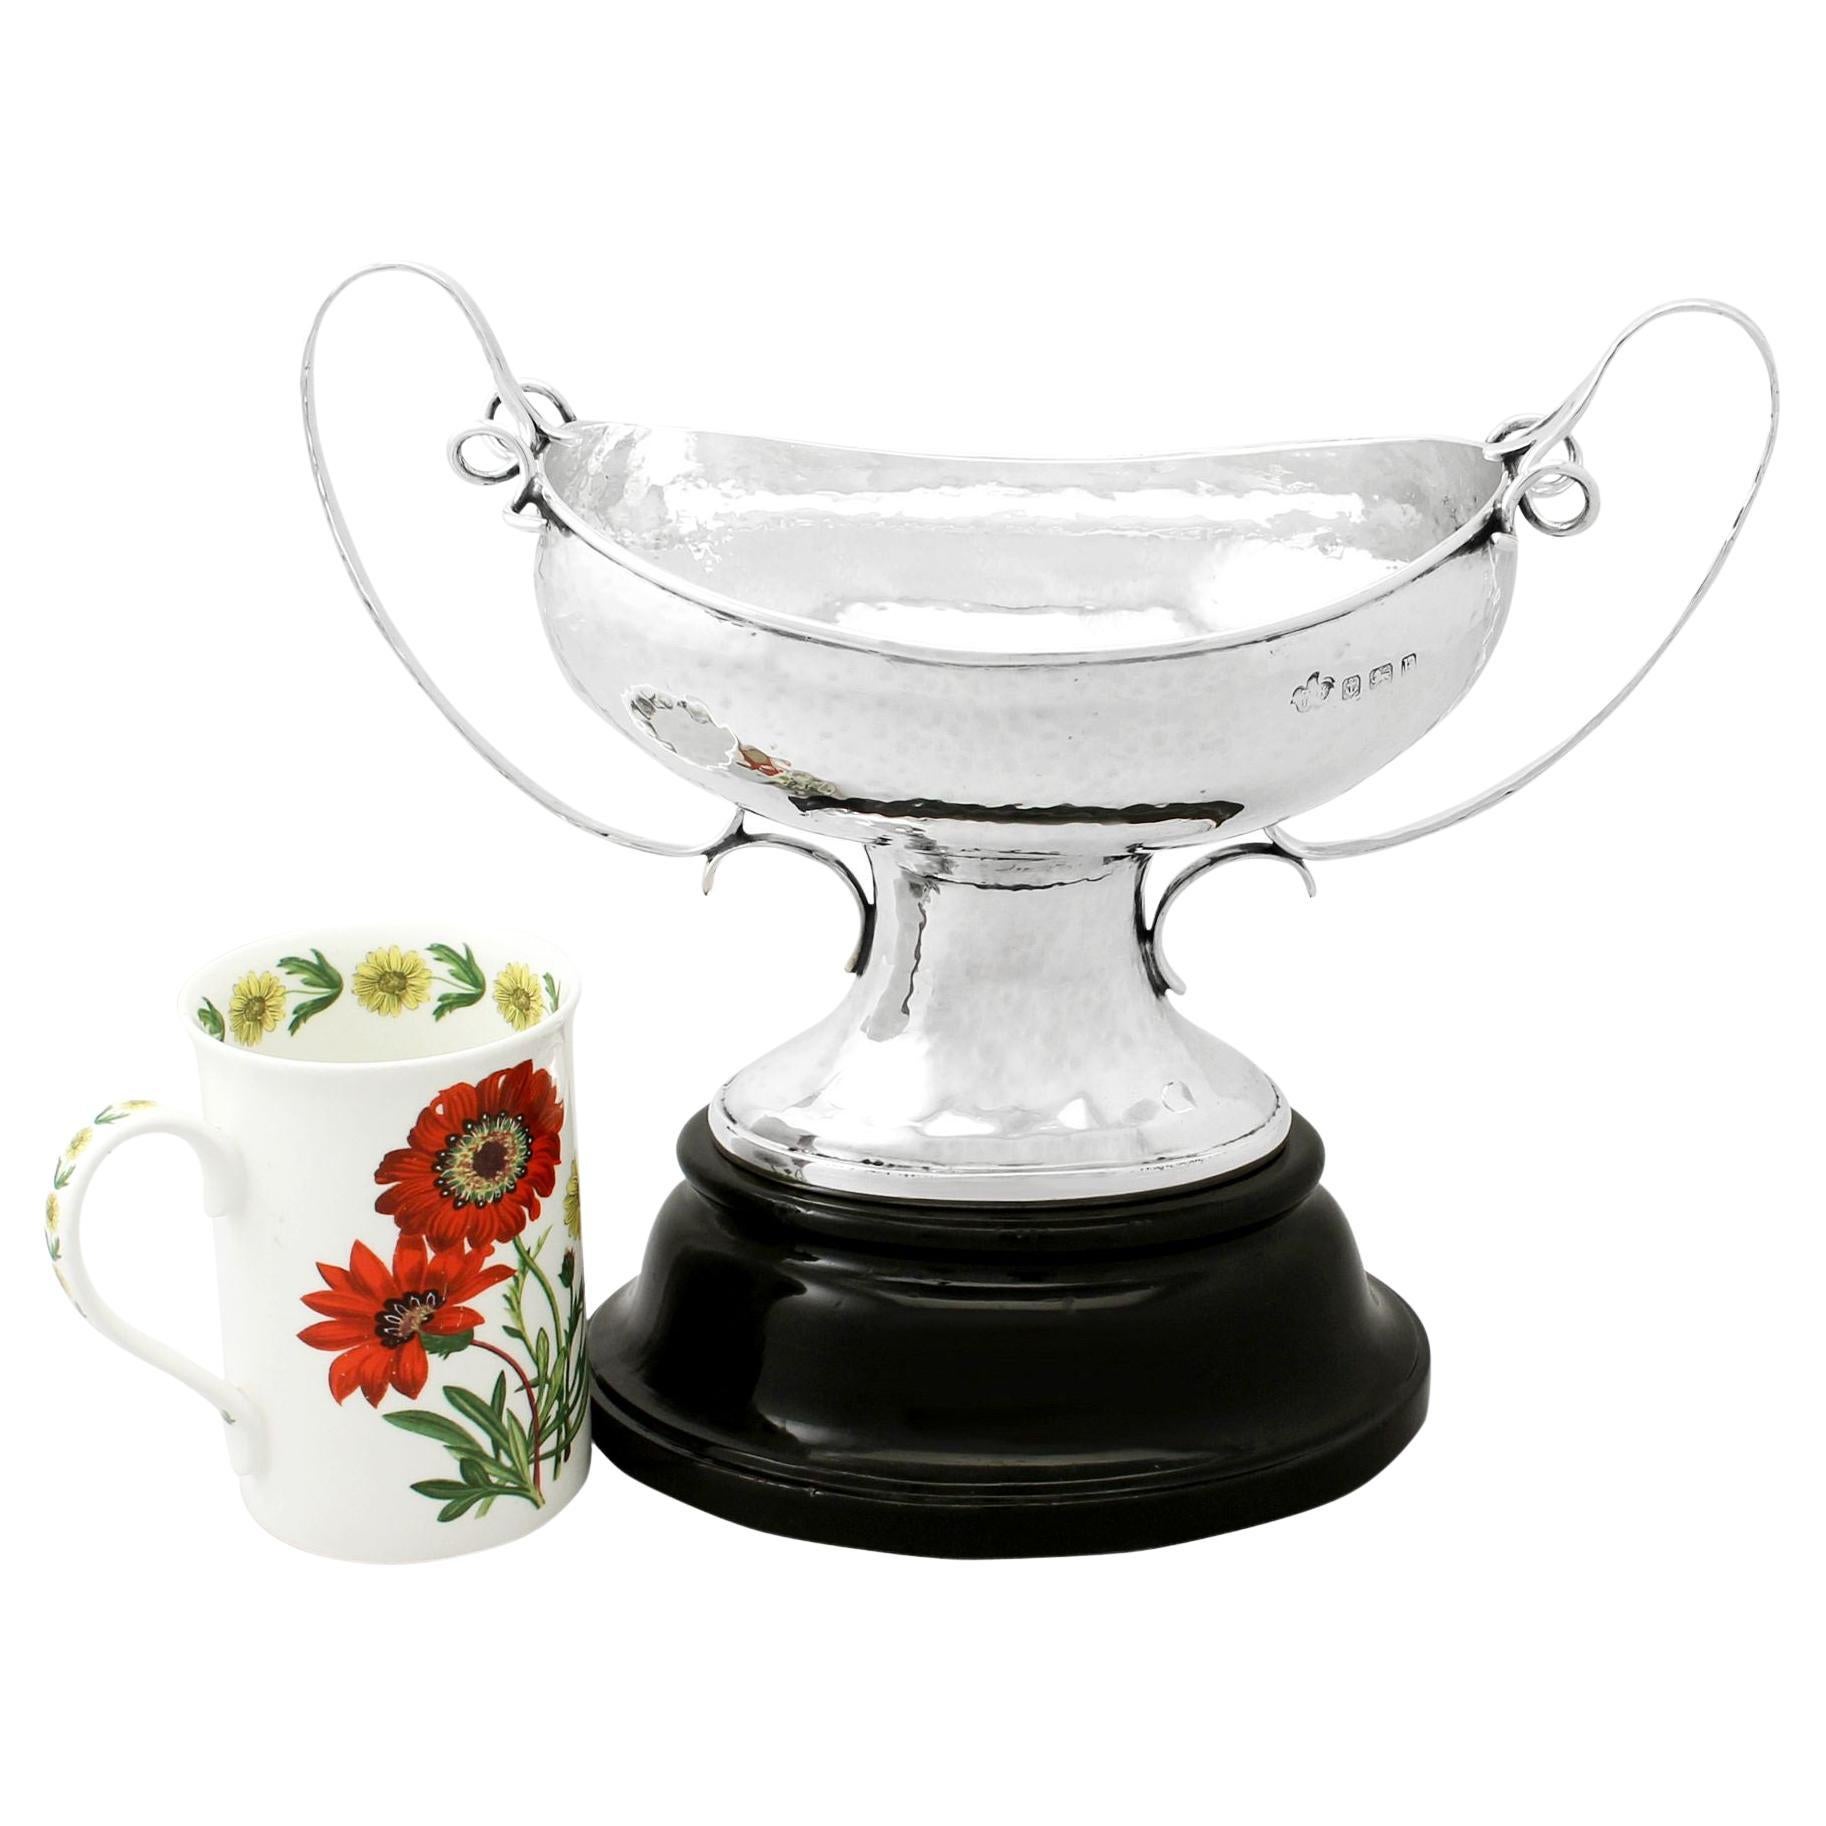 A fine and impressive antique Edwardian English sterling silver presentation bowl/cup in the Arts & Crafts style; an addition to our silver presentation collection

This fine antique Edwardian sterling silver presentation bowl/bowl has a plain